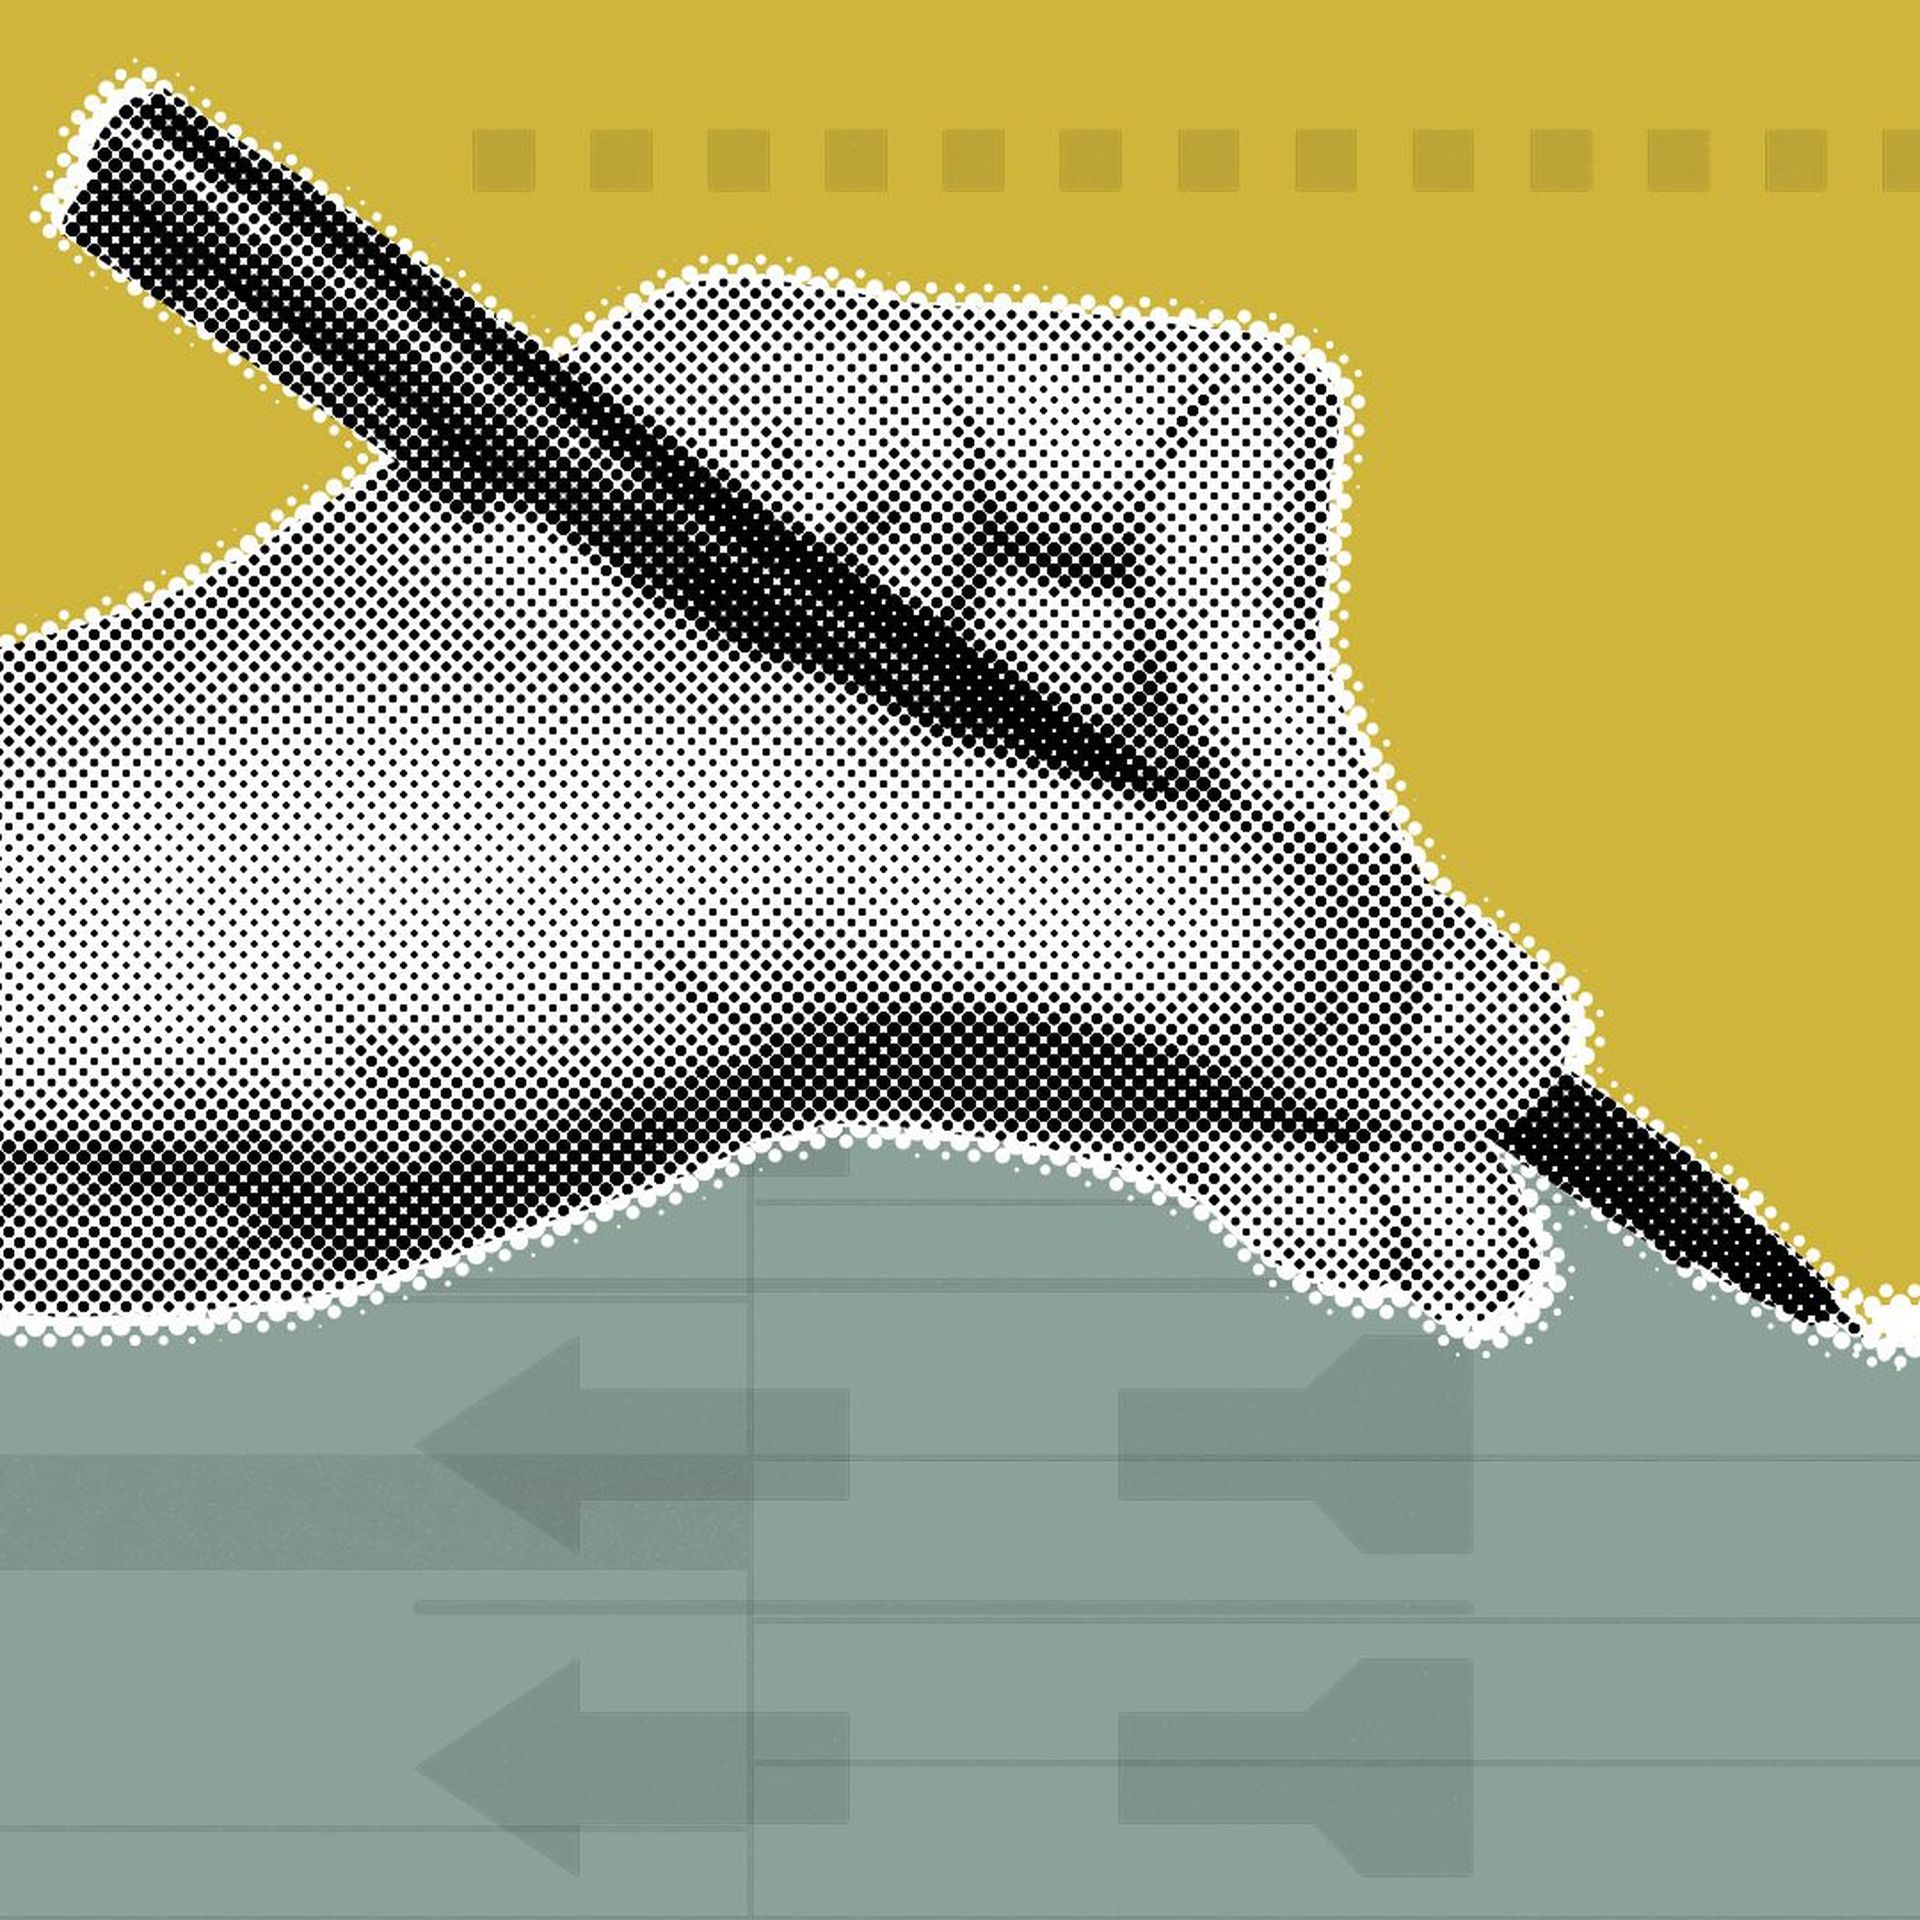 Illustration of a hand holding a pen with abstract ballot elements in the background.